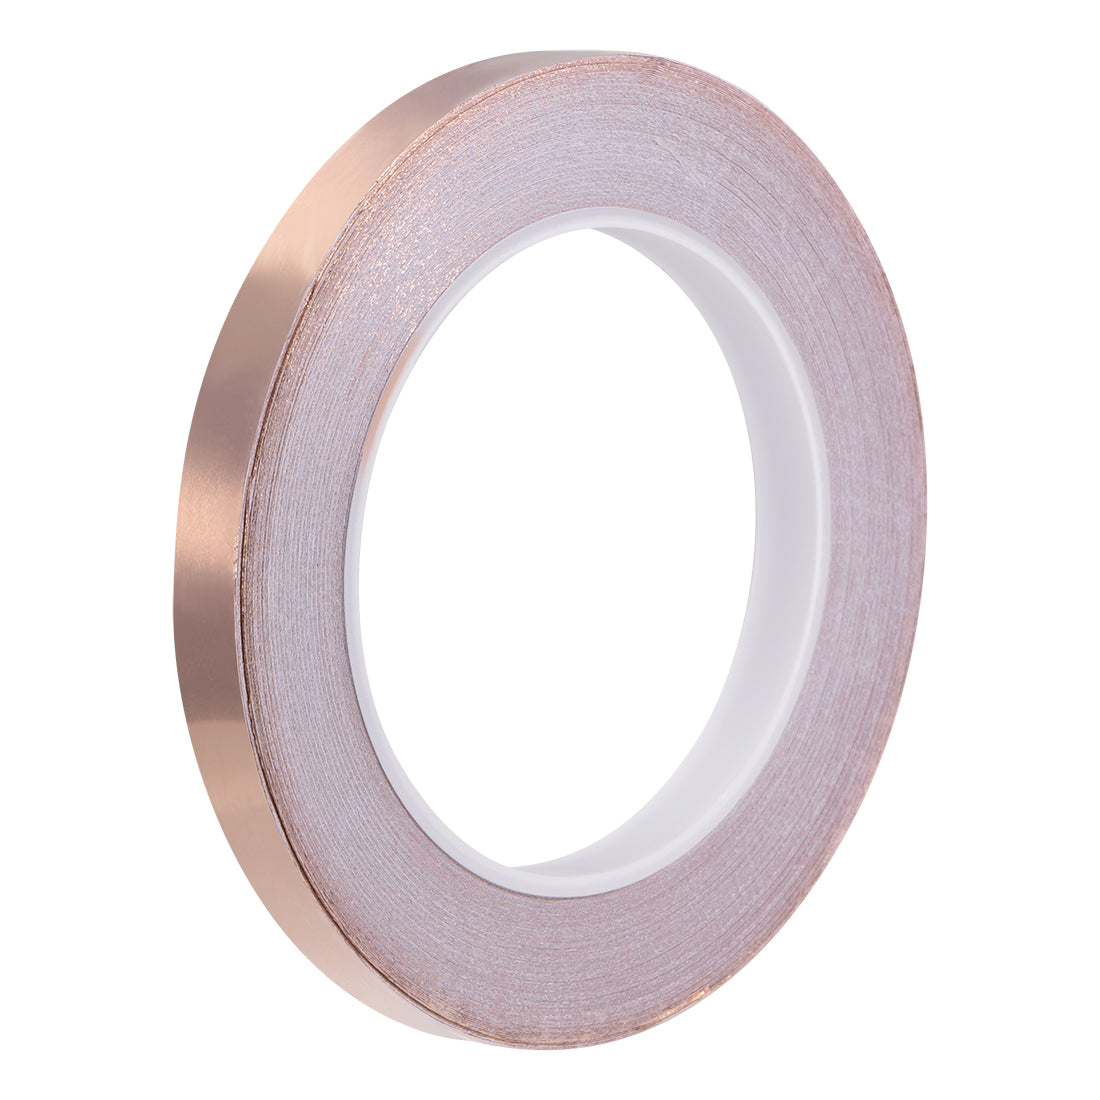 uxcell Uxcell Single-sided Conductive Tape Copper Foil Tape 10mm x 30m(98ft) for EMI Shielding, Stained Glass, Electrical Repairs